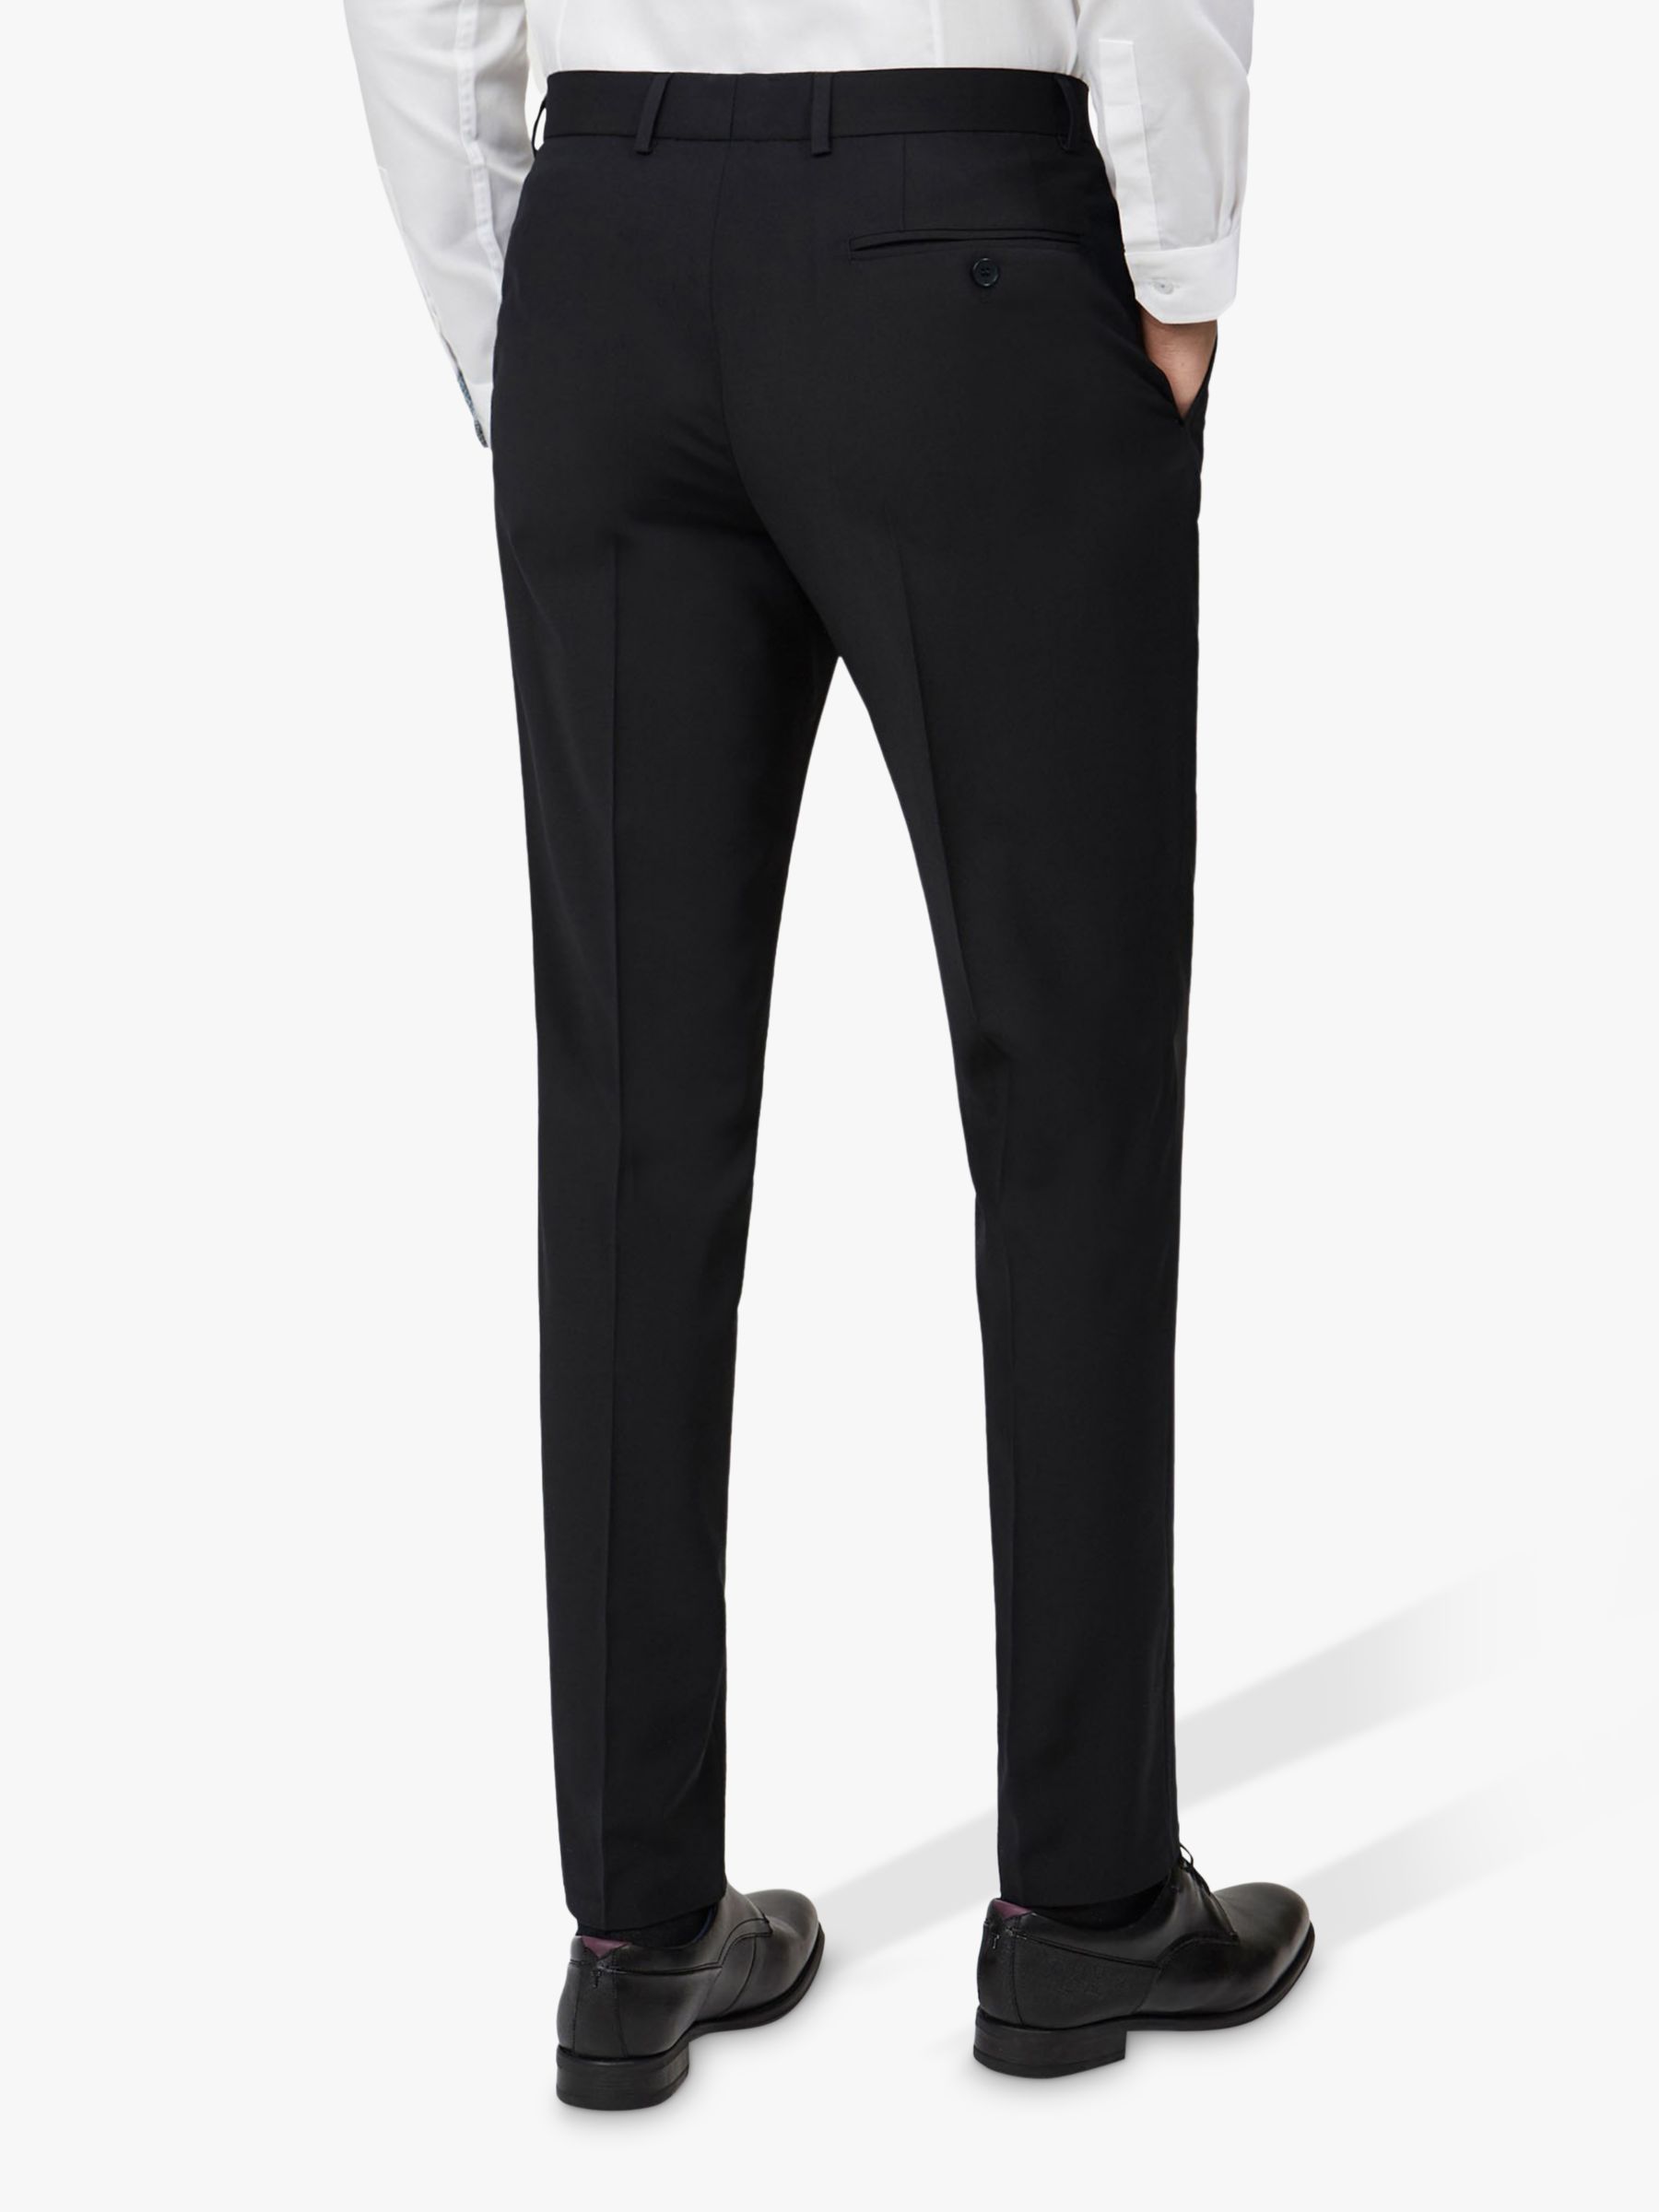 Buy Ted Baker Panama Wool Blend Suit Trousers Online at johnlewis.com